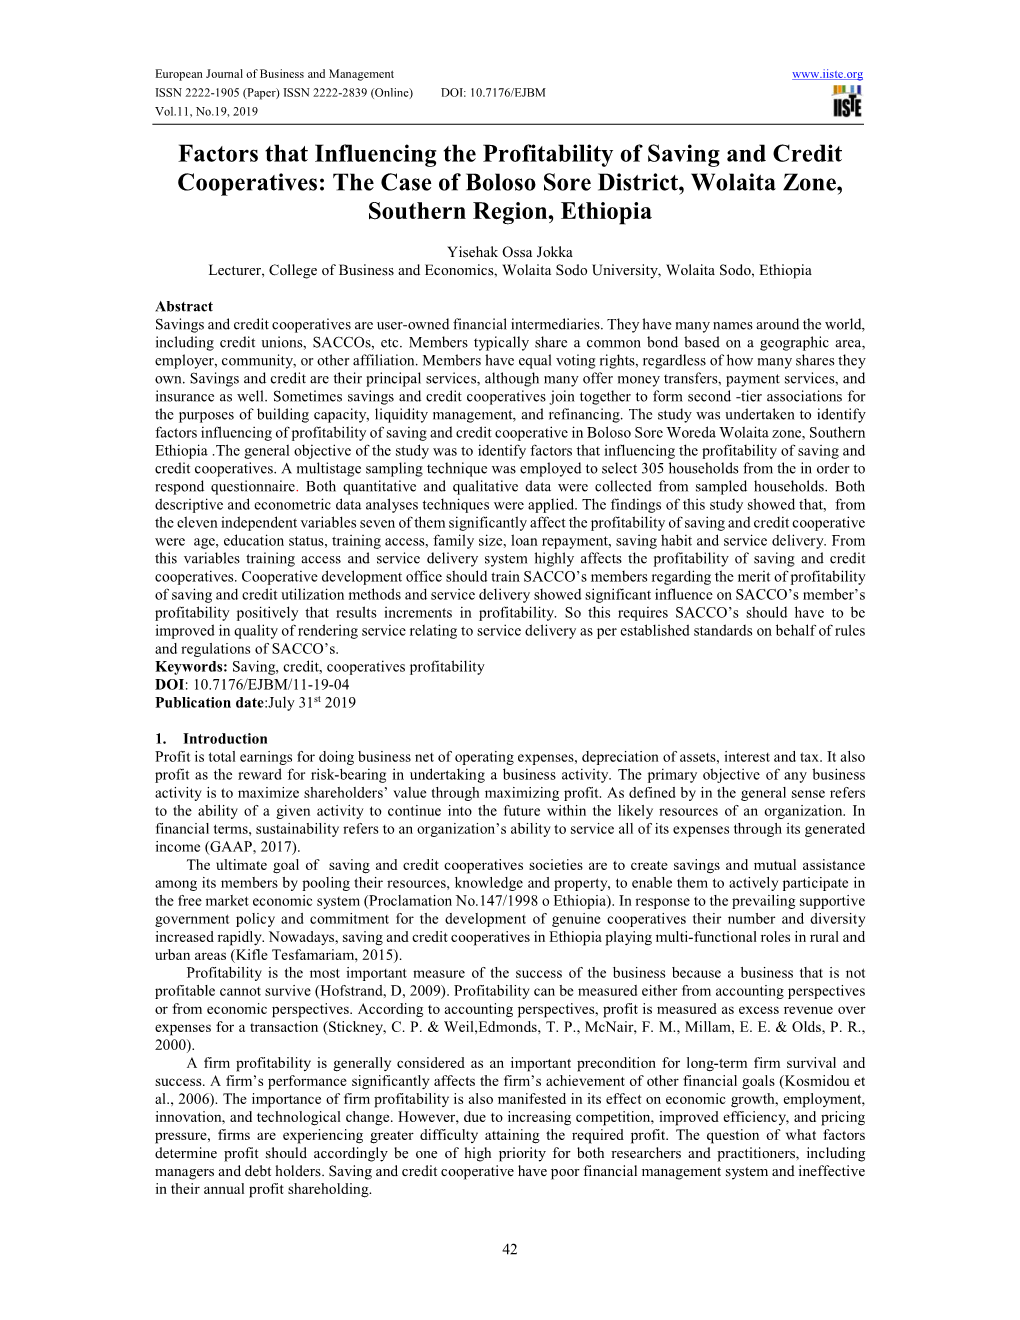 Factors That Influencing the Profitability of Saving and Credit Cooperatives: the Case of Boloso Sore District, Wolaita Zone, Southern Region, Ethiopia